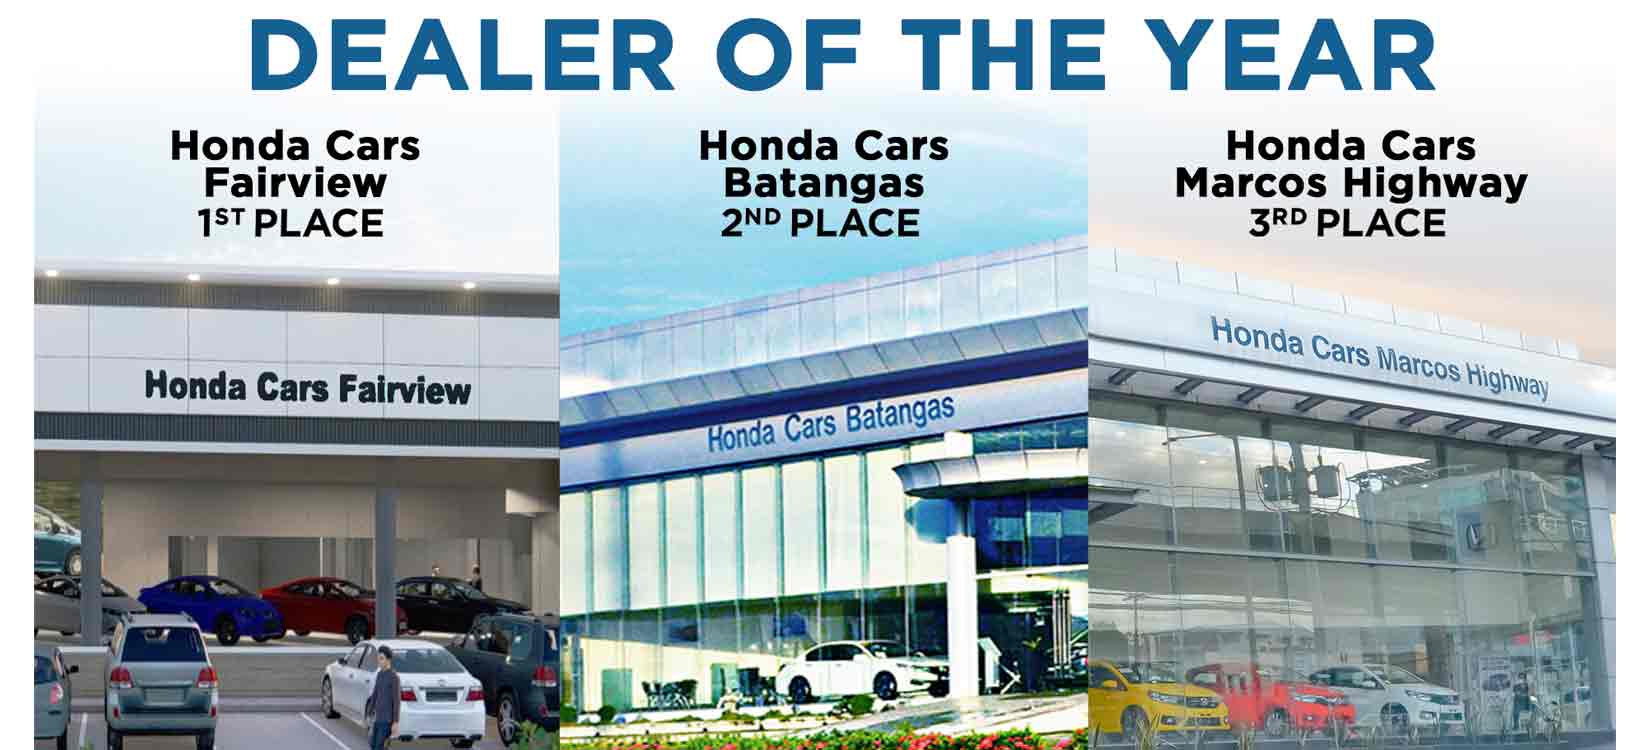 Honda Cars Dealers recognized in the 2022 Dealer Conference